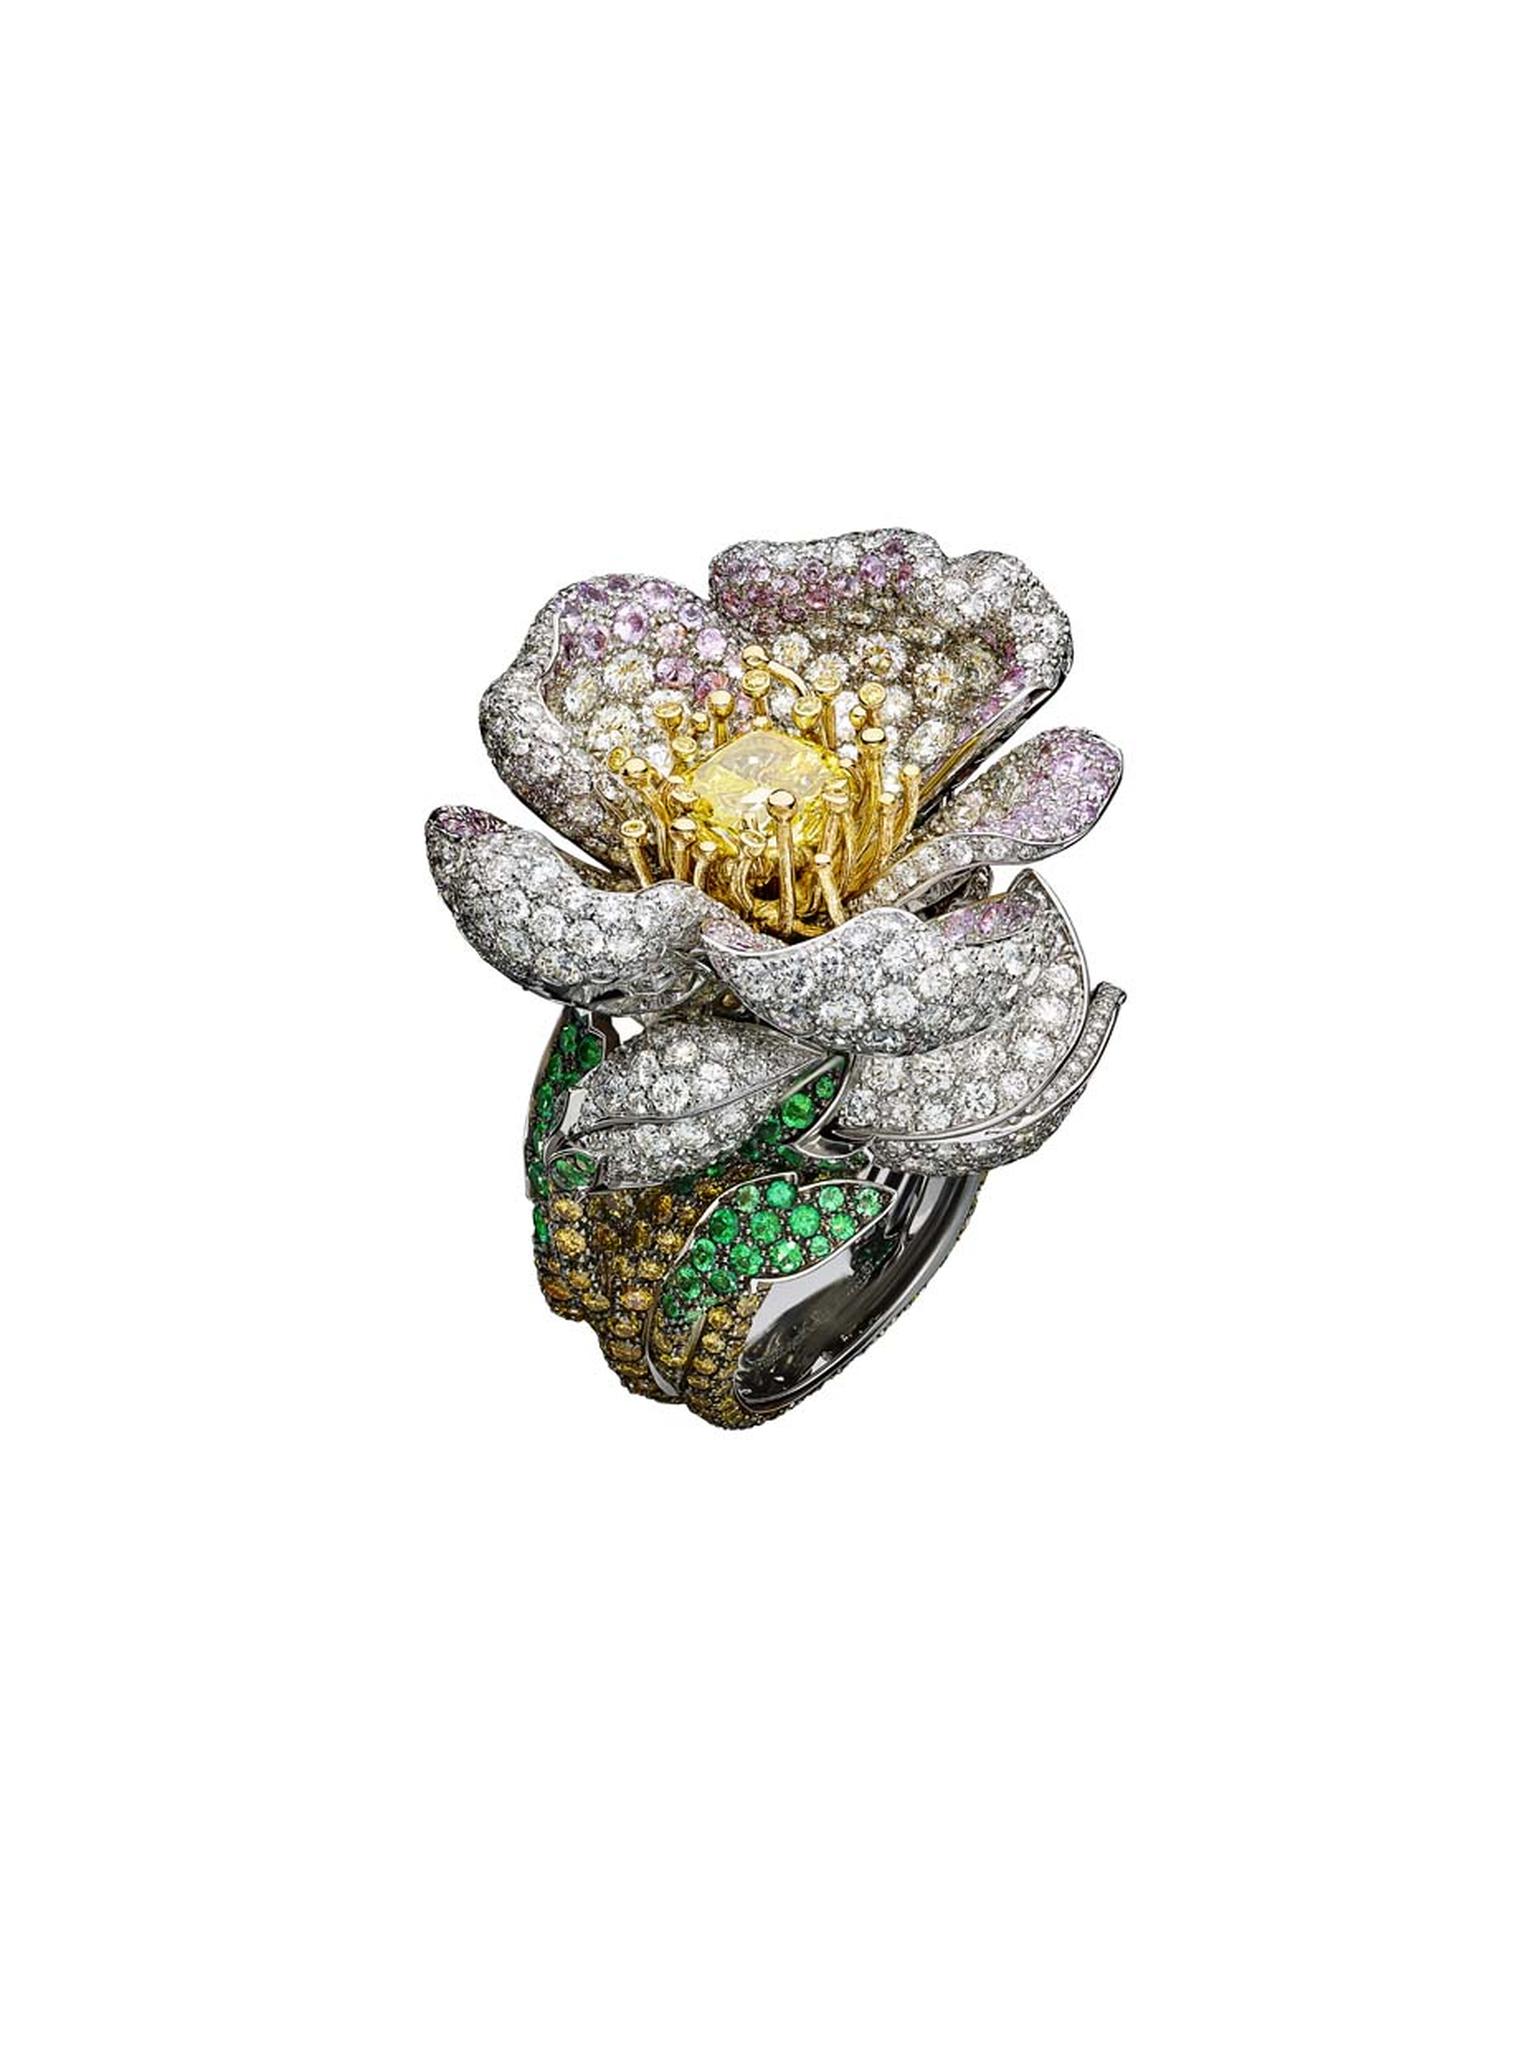 Giampiero Bodino Primavera white and yellow gold ring featuring an emerald paved shank leading to pink sapphires as well as white, grey, yellow and cognac diamonds underneath a budding yellow diamond. Image by: Laziz Hamani